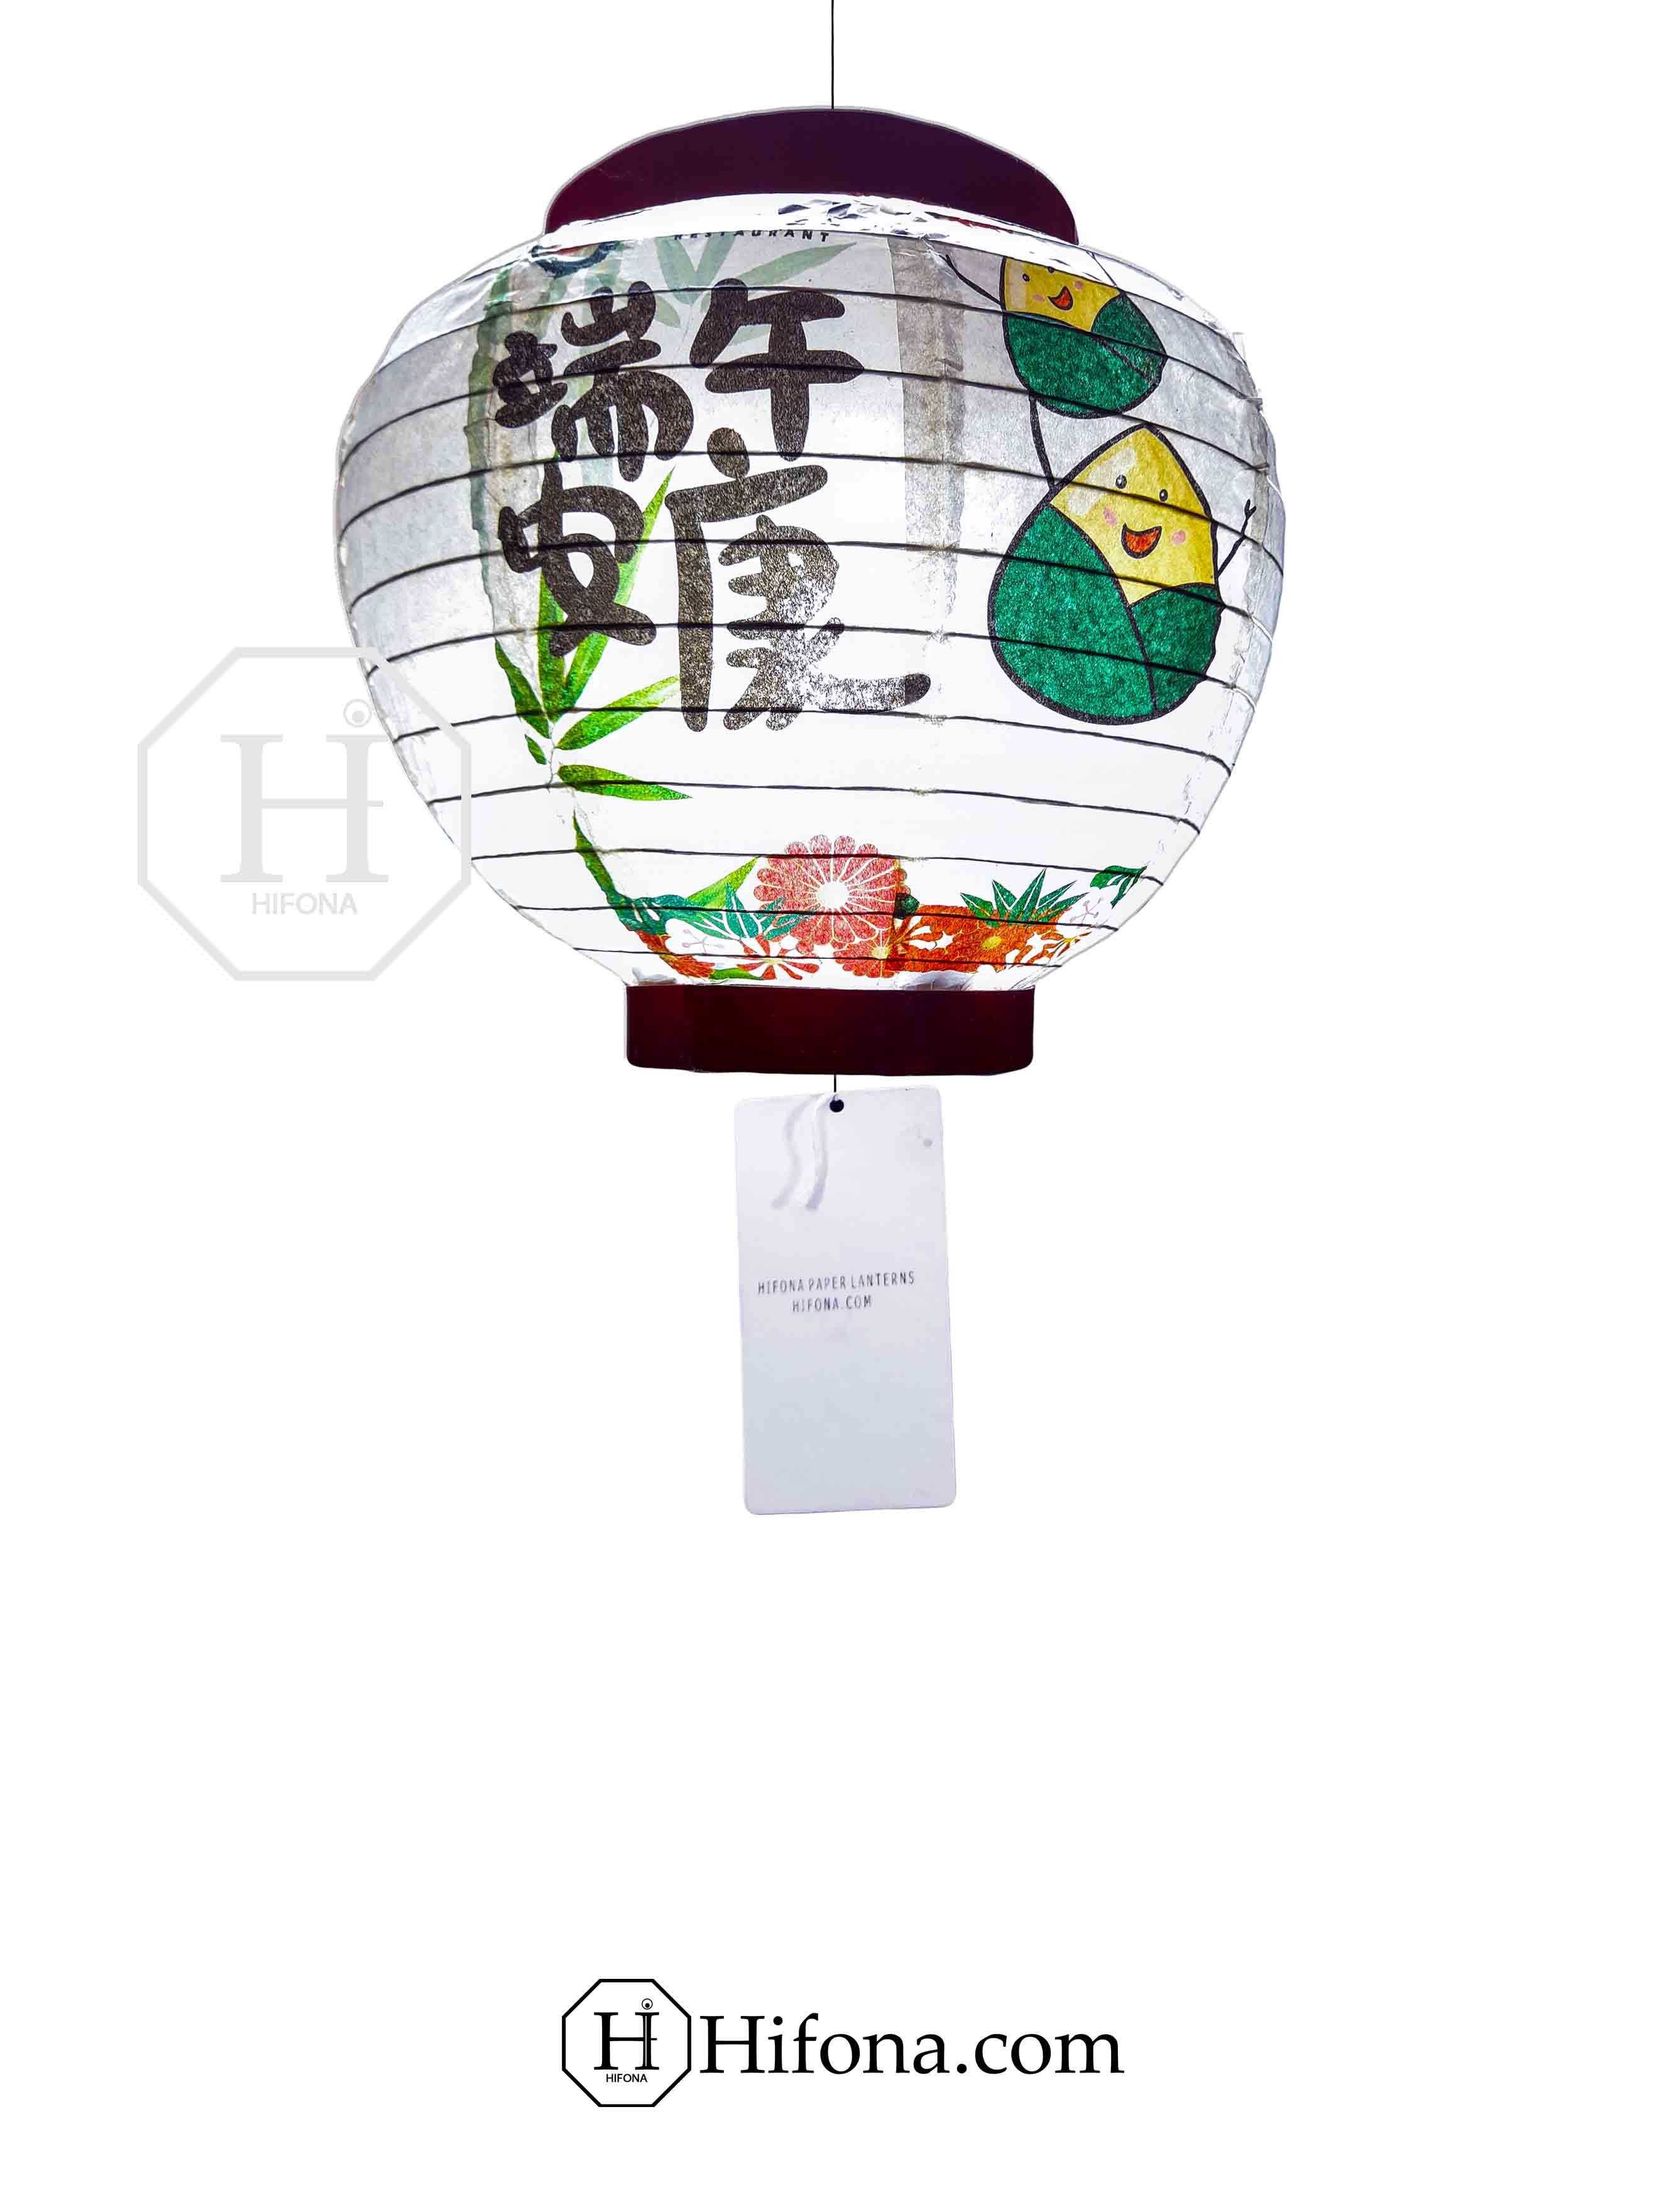 Customized Paper Lantern Displays: Enhancing the Visual Appeal of Japanese and Chinese Food Events